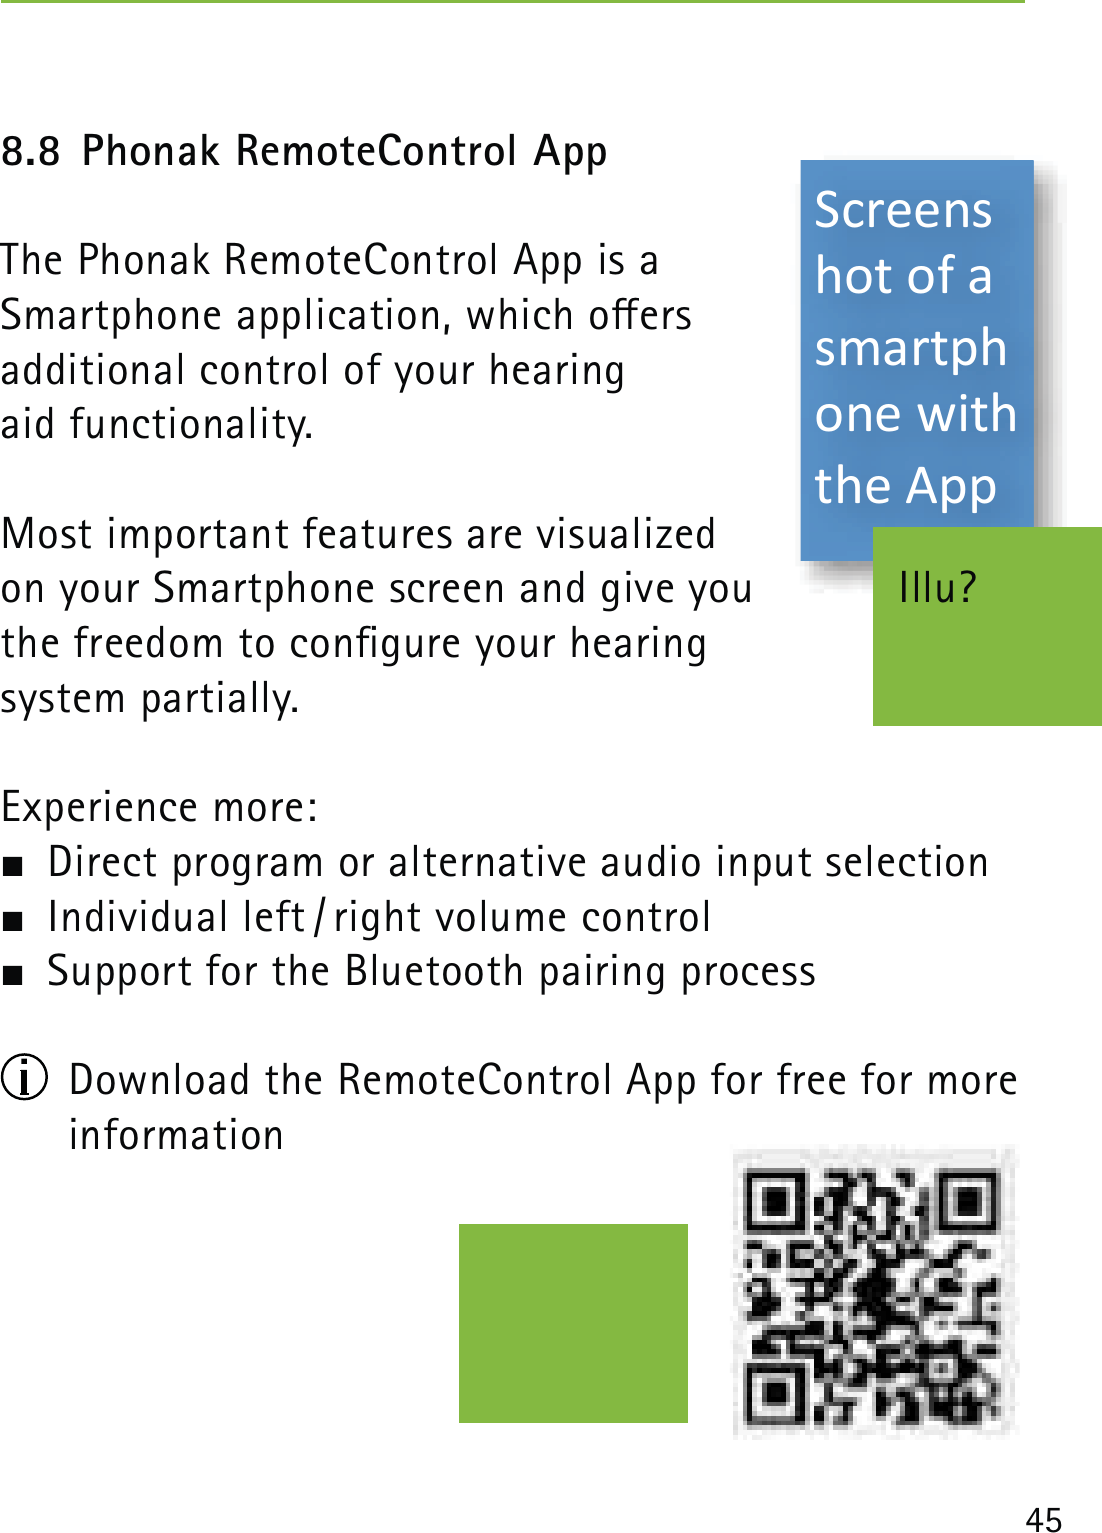 458.8 Phonak RemoteControl AppThe Phonak RemoteControl App is a  Smartphone application, which oers  additional control of your hearing  aid functionality. Most important features are visualized  on your Smartphone screen and give you  the freedom to congure your hearing  system partially.Experience more:  Direct program or alternative audio input selection  Individual left / right volume control  Support for the Bluetooth pairing process  Download the RemoteControl App for free for more information  Illu?